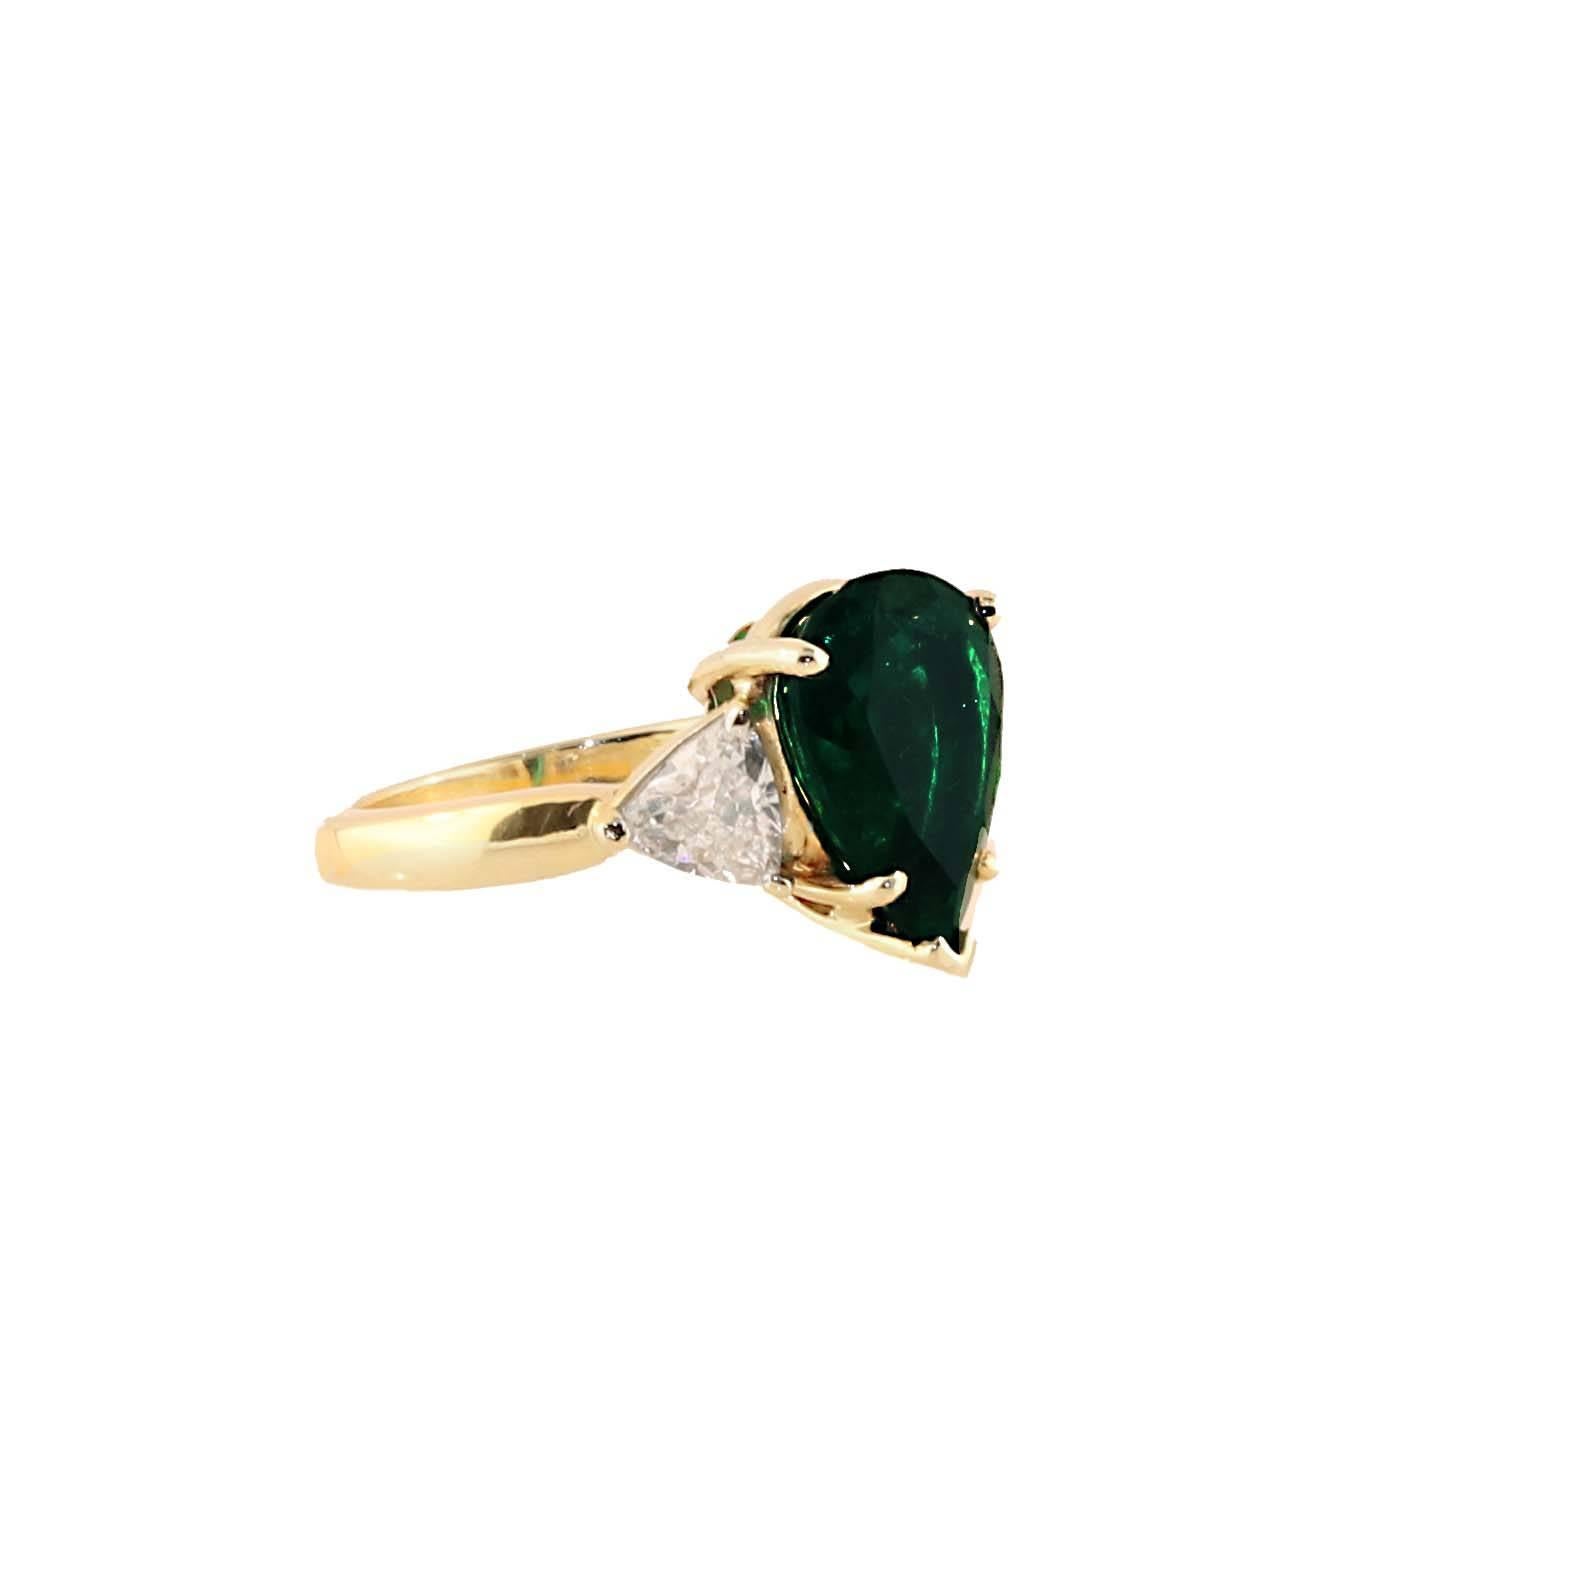 The ideal pear shape emerald. This deep green color is the perfect color for an emerald. Set next to you gorgeous white diamonds weighing a total of 1.20 carats this ring is definitely special. The ring can be sized up or down with no problem. Just